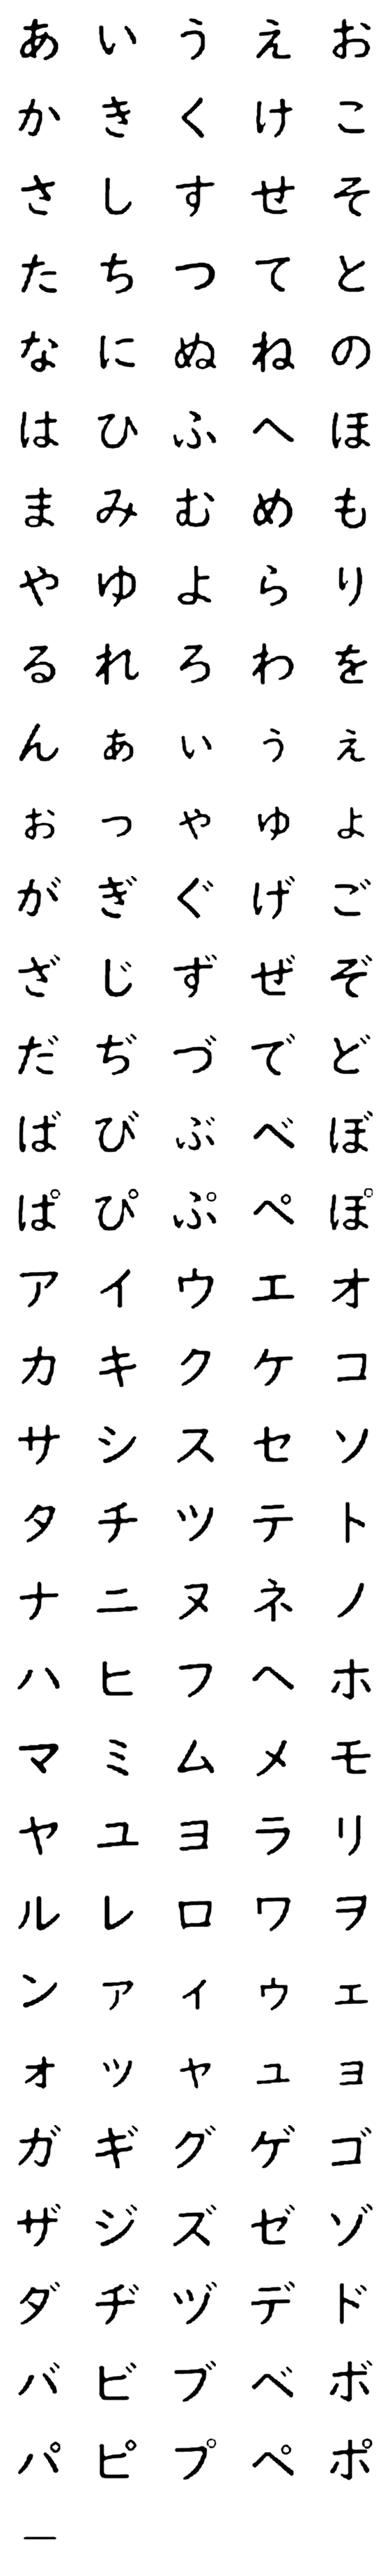 [LINE絵文字]どんより文字の画像一覧